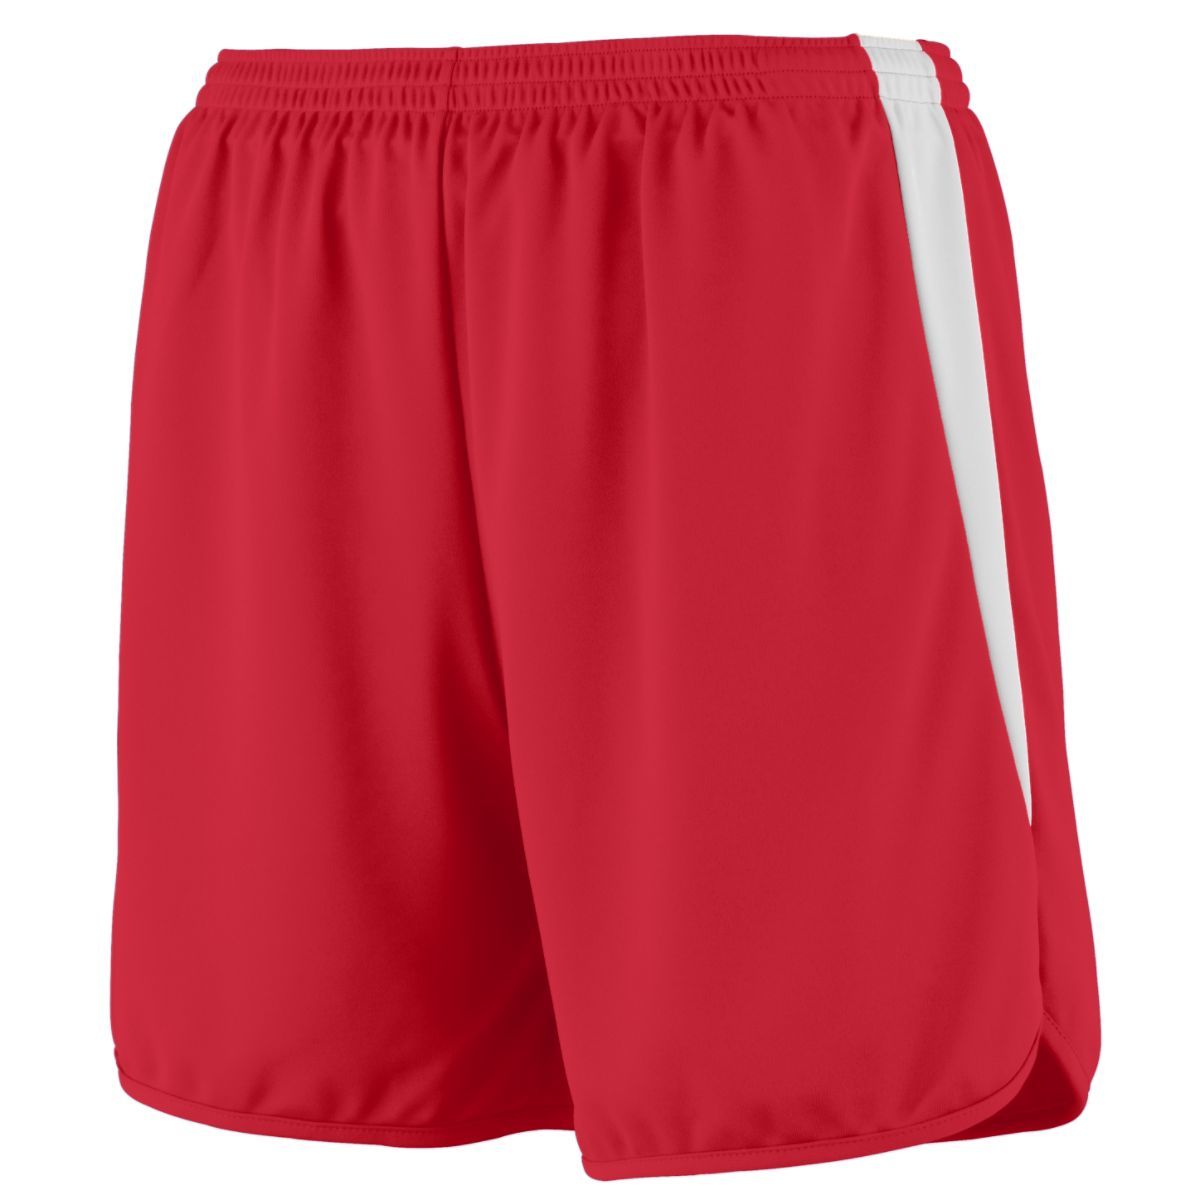 Augusta Sportswear Rapidpace Track Shorts in Red/White  -Part of the Adult, Adult-Shorts, Augusta-Products, Track-Field product lines at KanaleyCreations.com